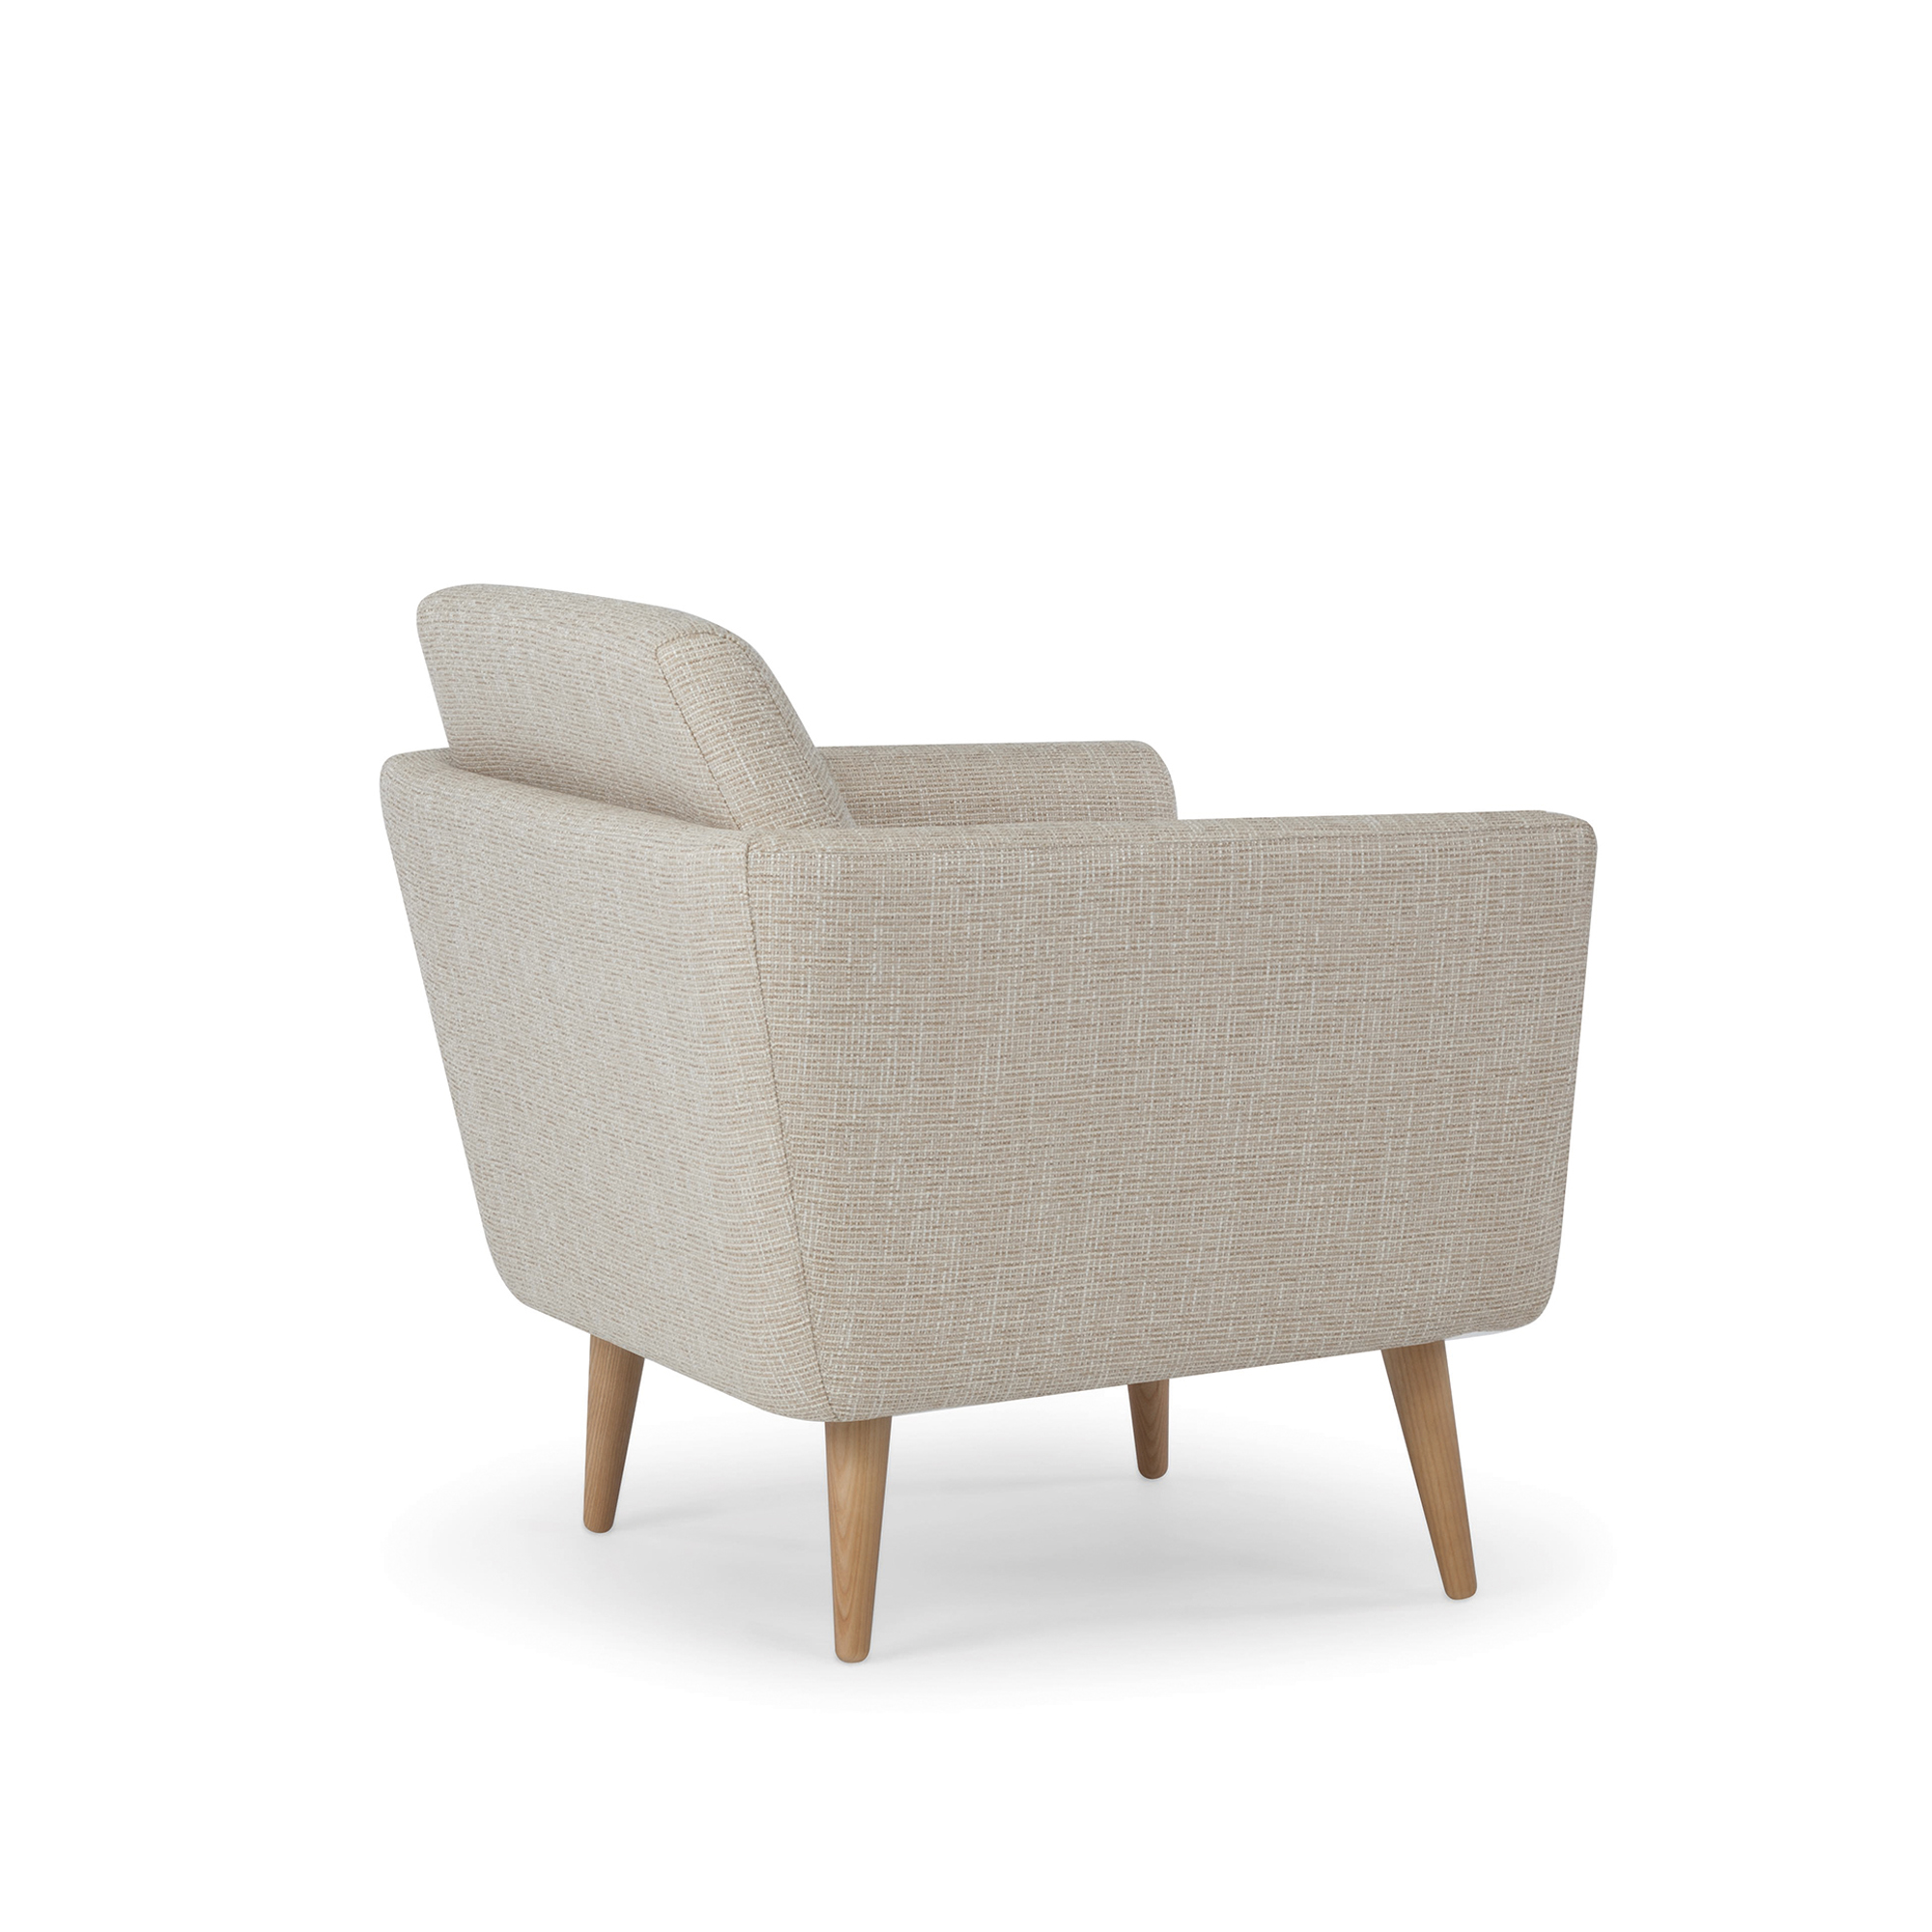 Clipse Lounge Chair with Wood Legs, Rear View